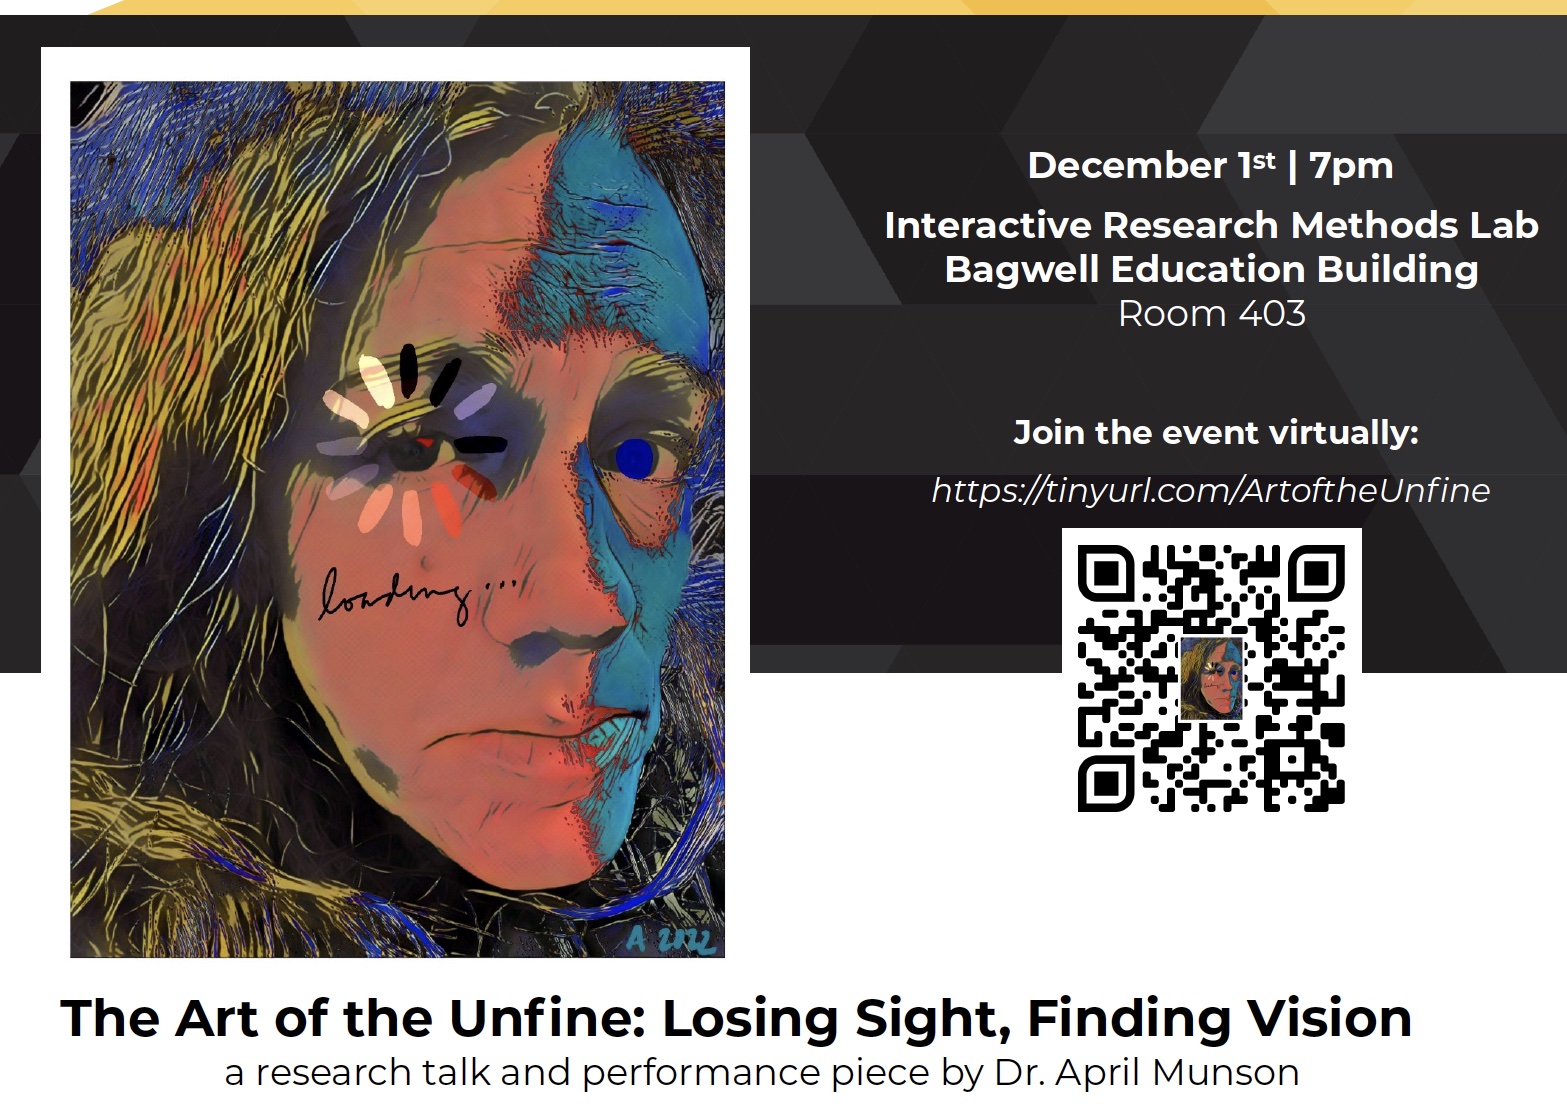 The Art of the Unfine: Losing Sight, Finding Vision 